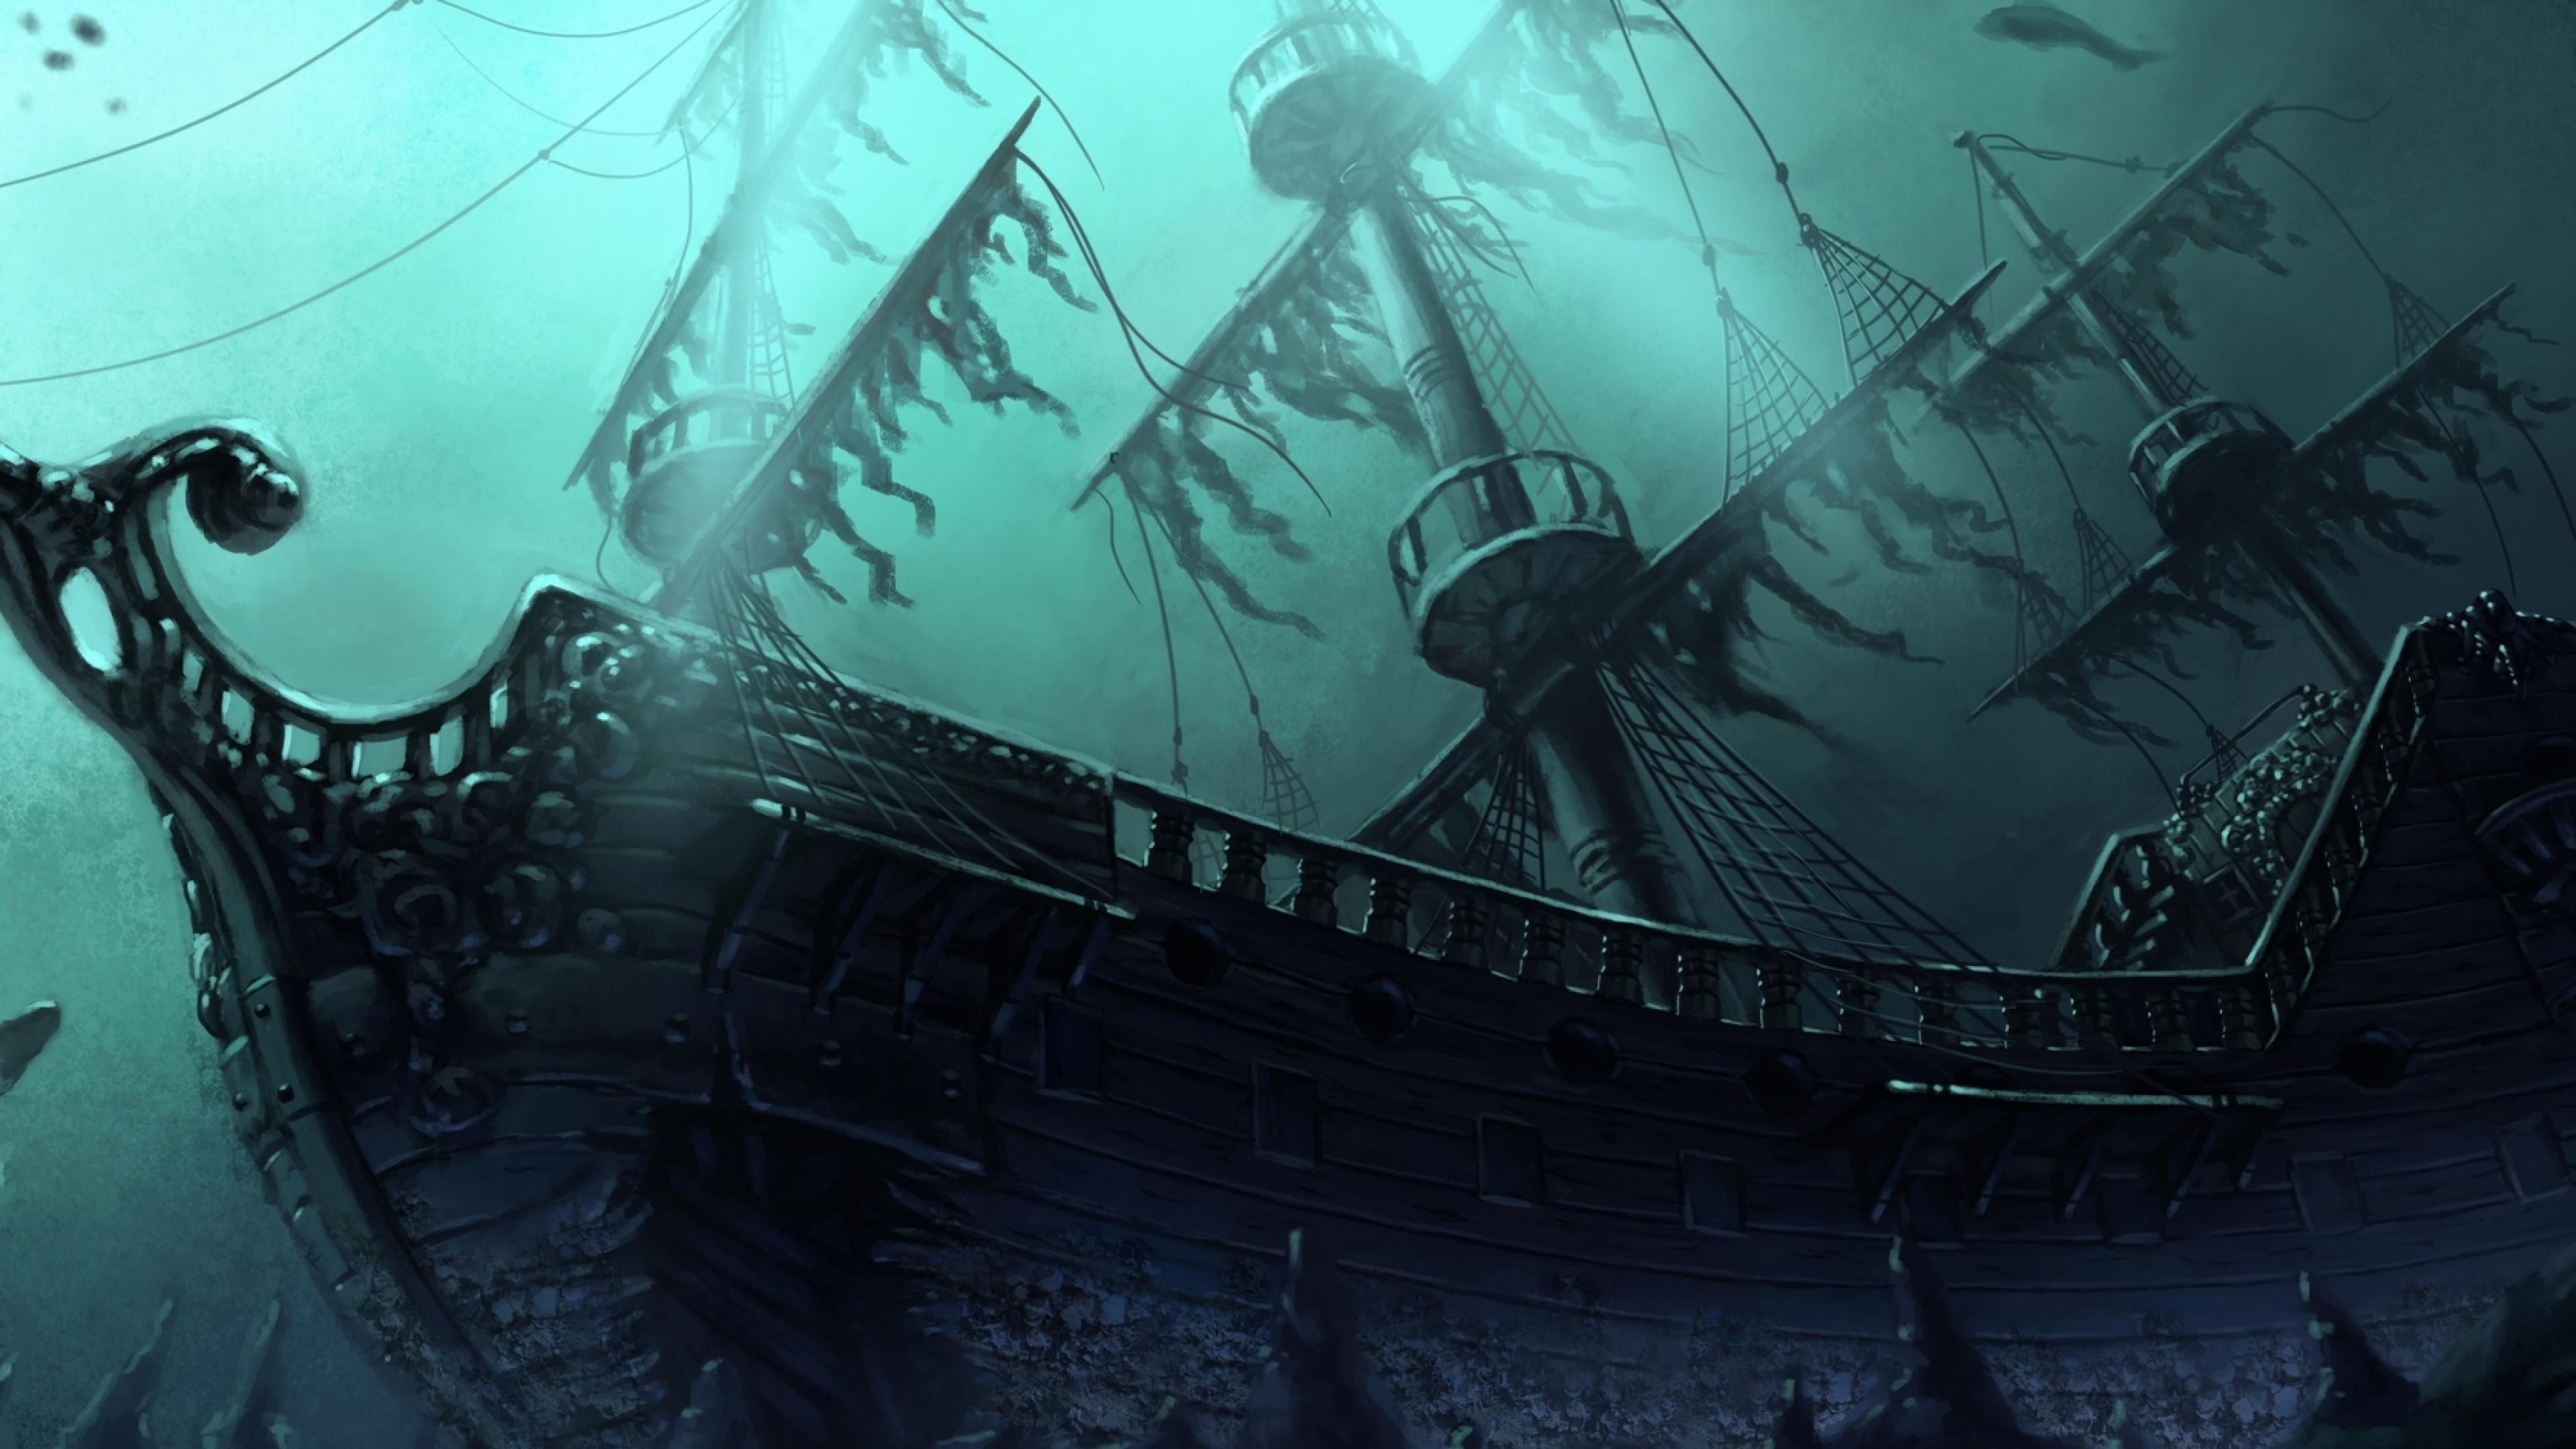 Ghost Pirate Ship Wallpaper High Quality Resolution Retail In